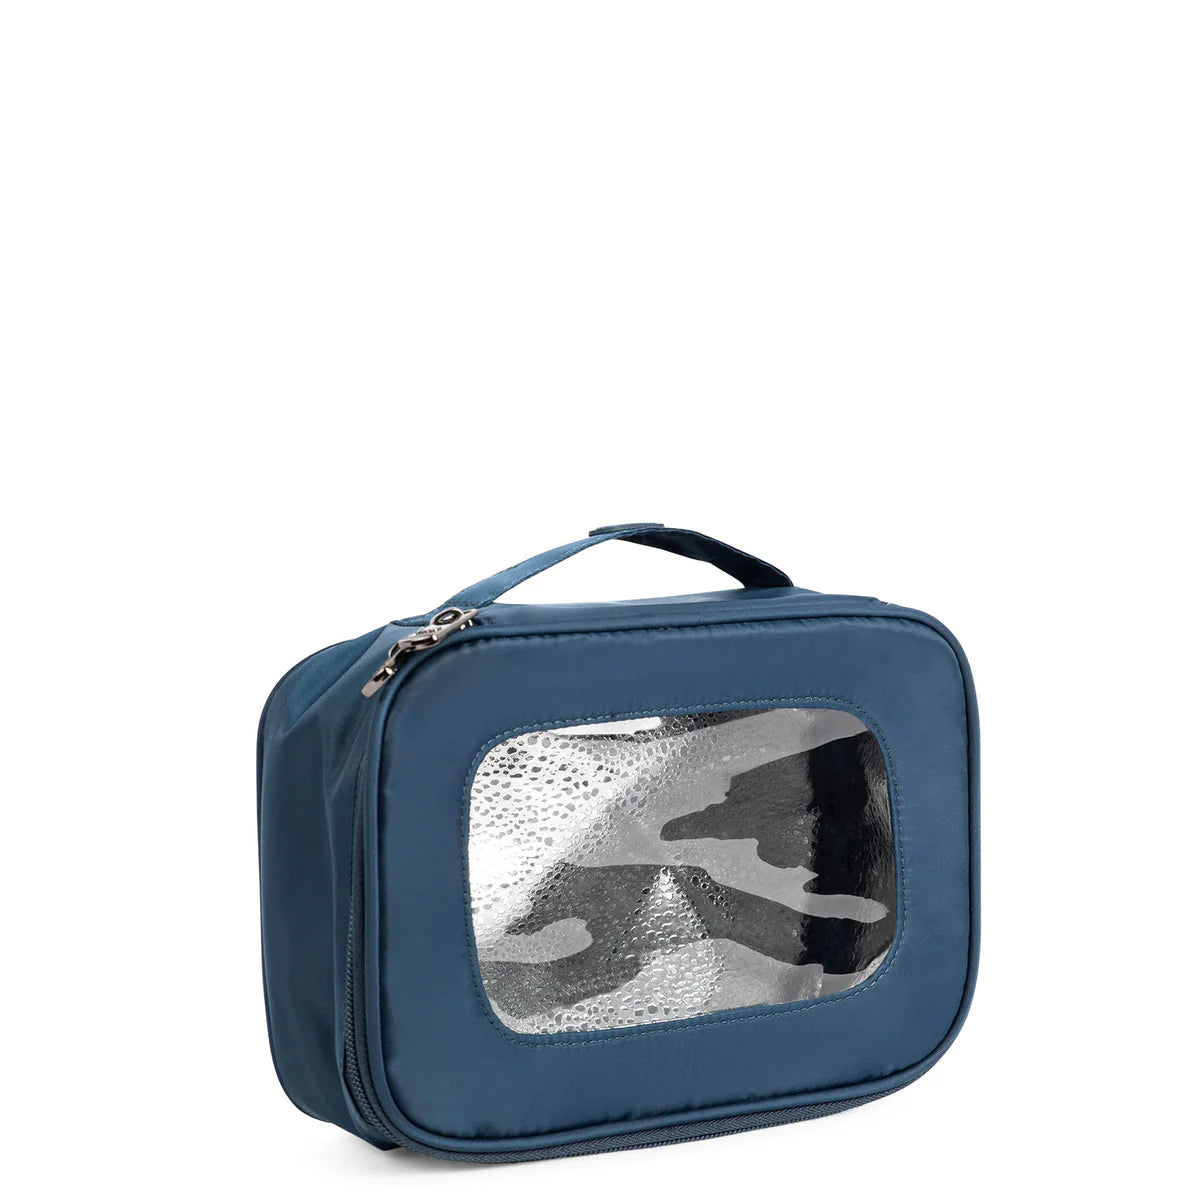 LUG Bento Insulated Container in Contemporary Navy